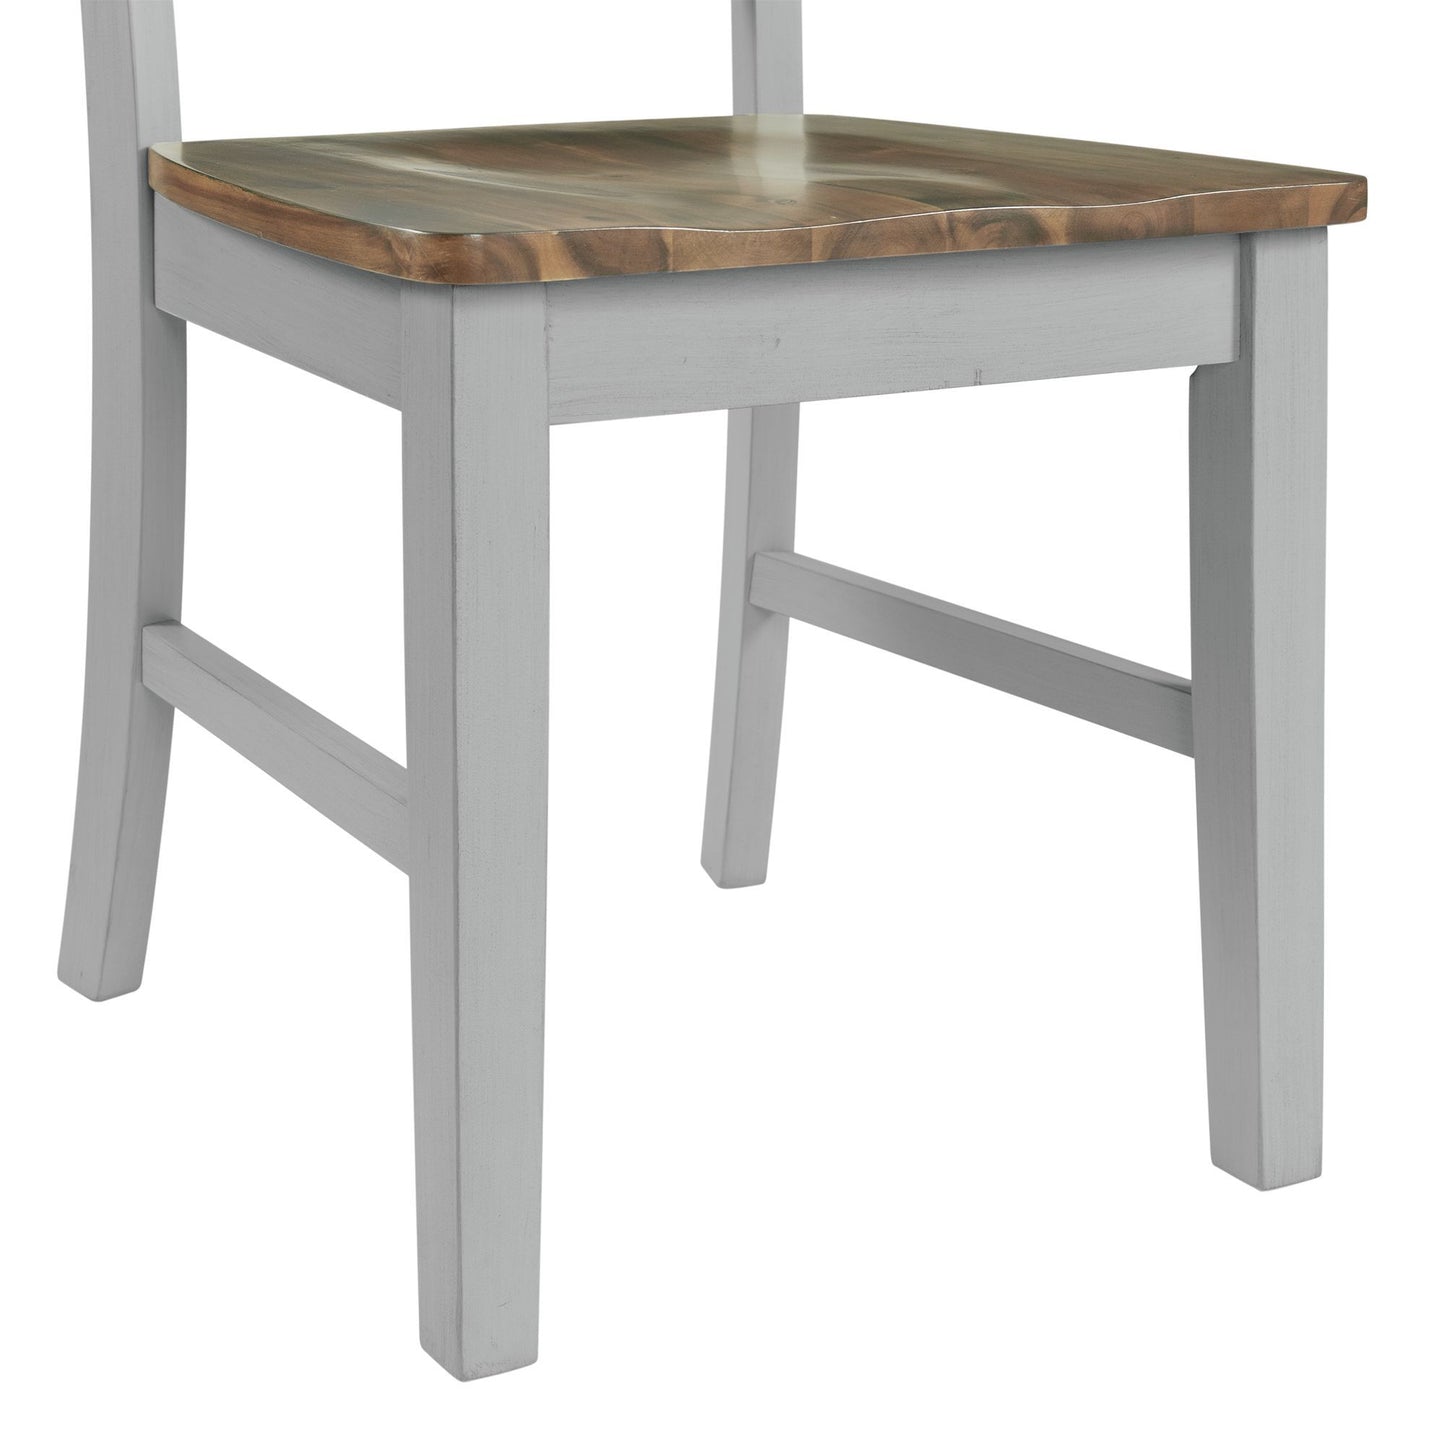 El Paso - 5 Piece Standard Height Dining Set, Table & Four Chairs - White